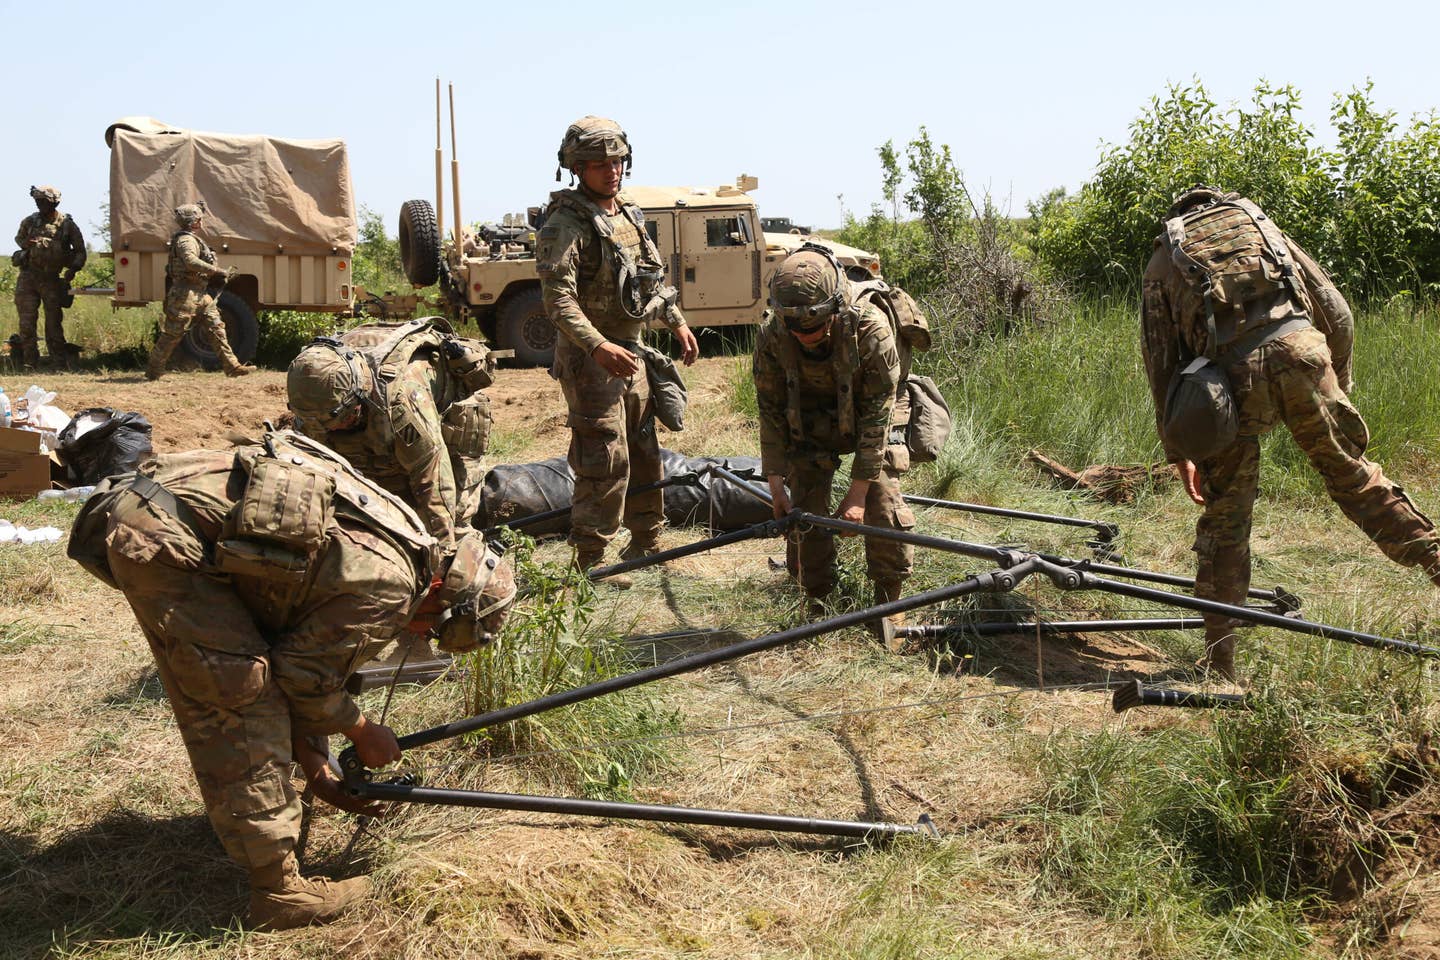 U.S. soldiers disassemble a TOC during exercise Allied Spirit at Drawsko Pomorskie Training Area, Poland, June 13, 2020. <em>U.S. Army photo by Sgt. Julian Padua</em>